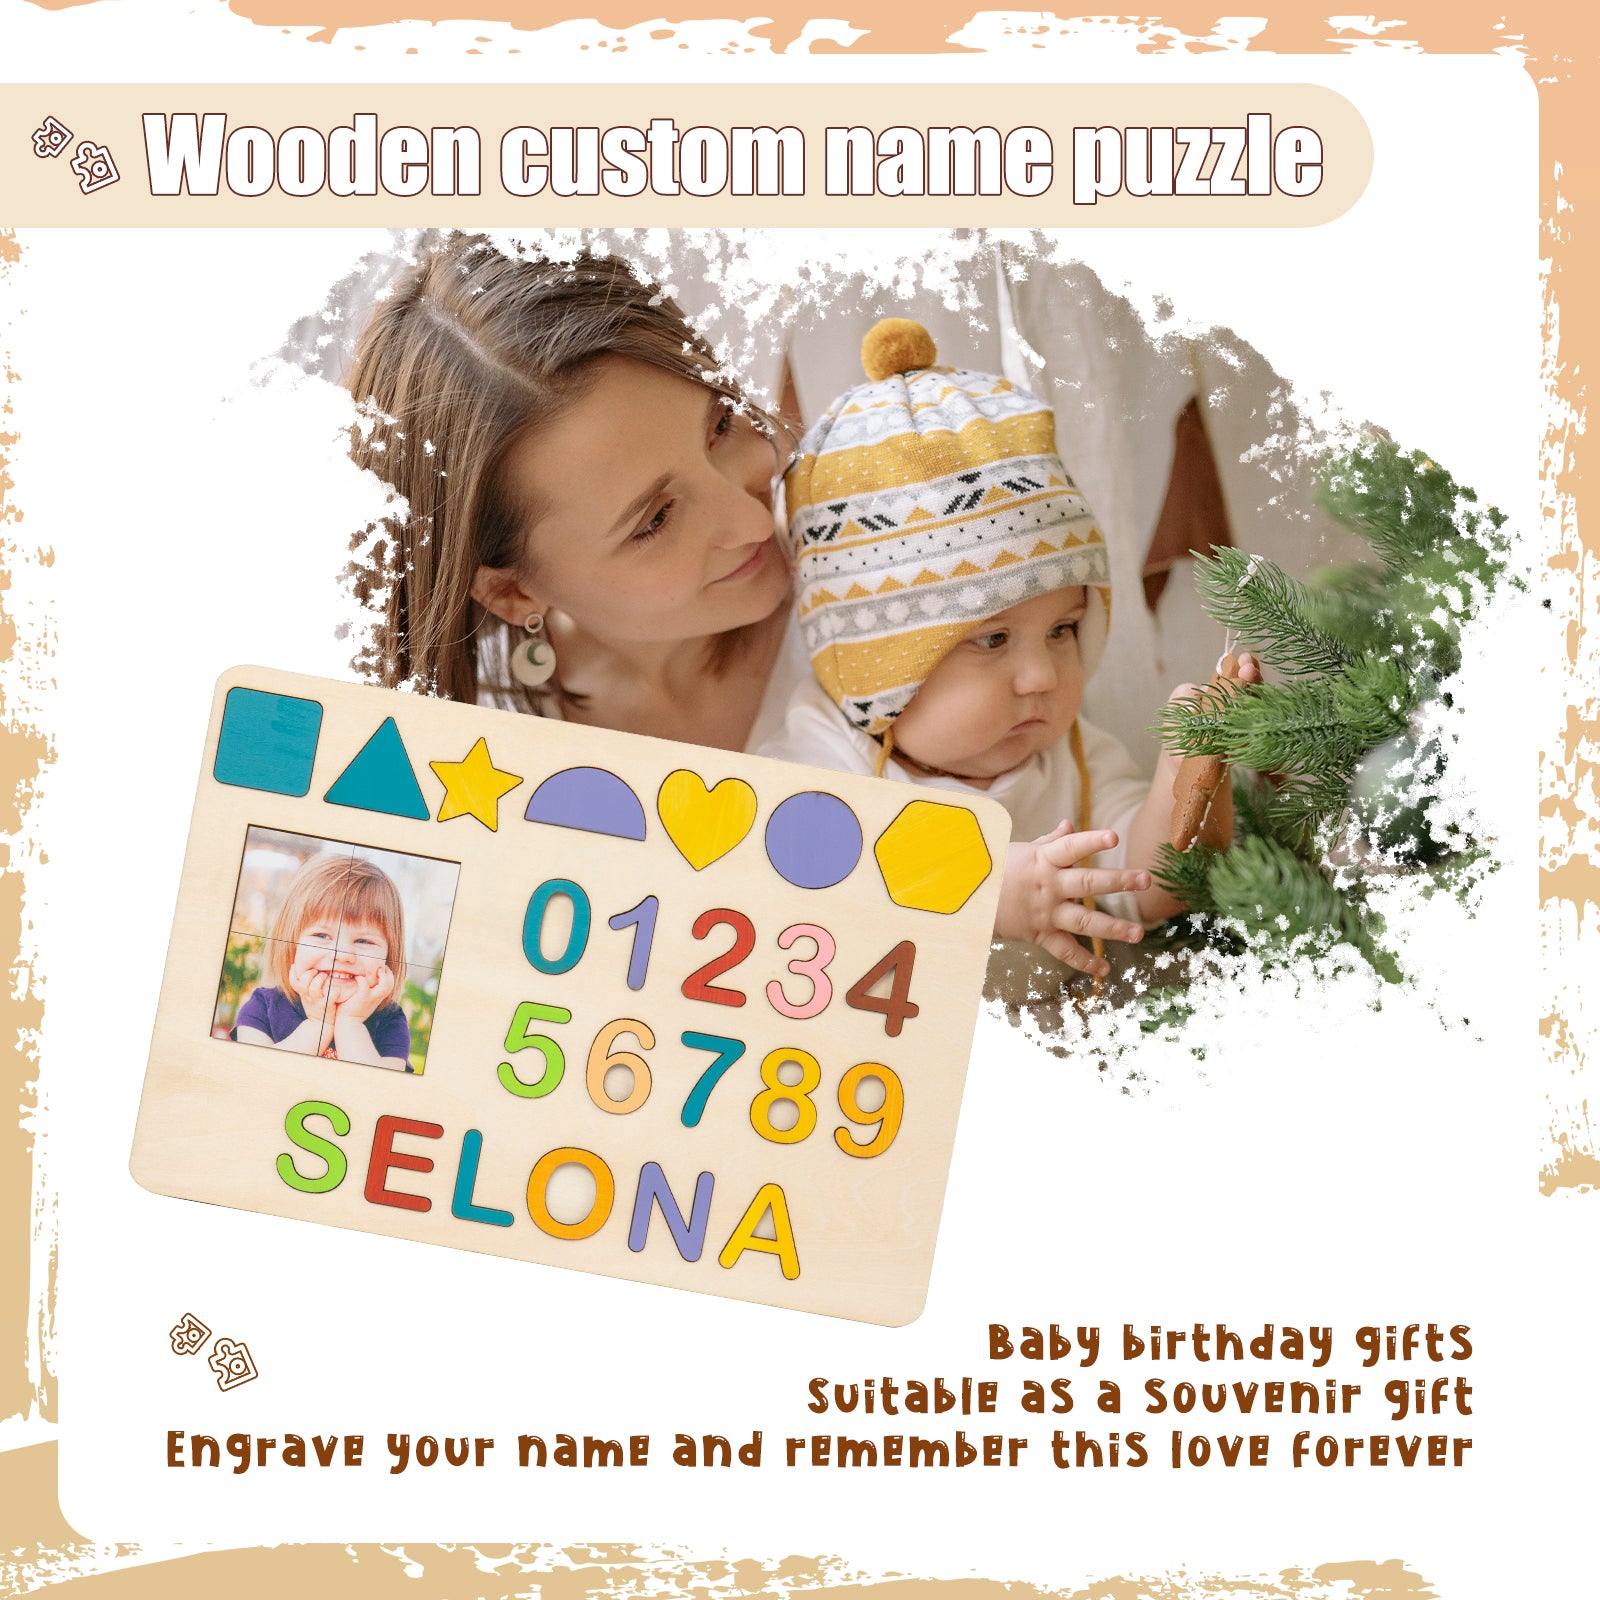 Custom Wooden Photo Name Puzzle With Numbers and Shapes